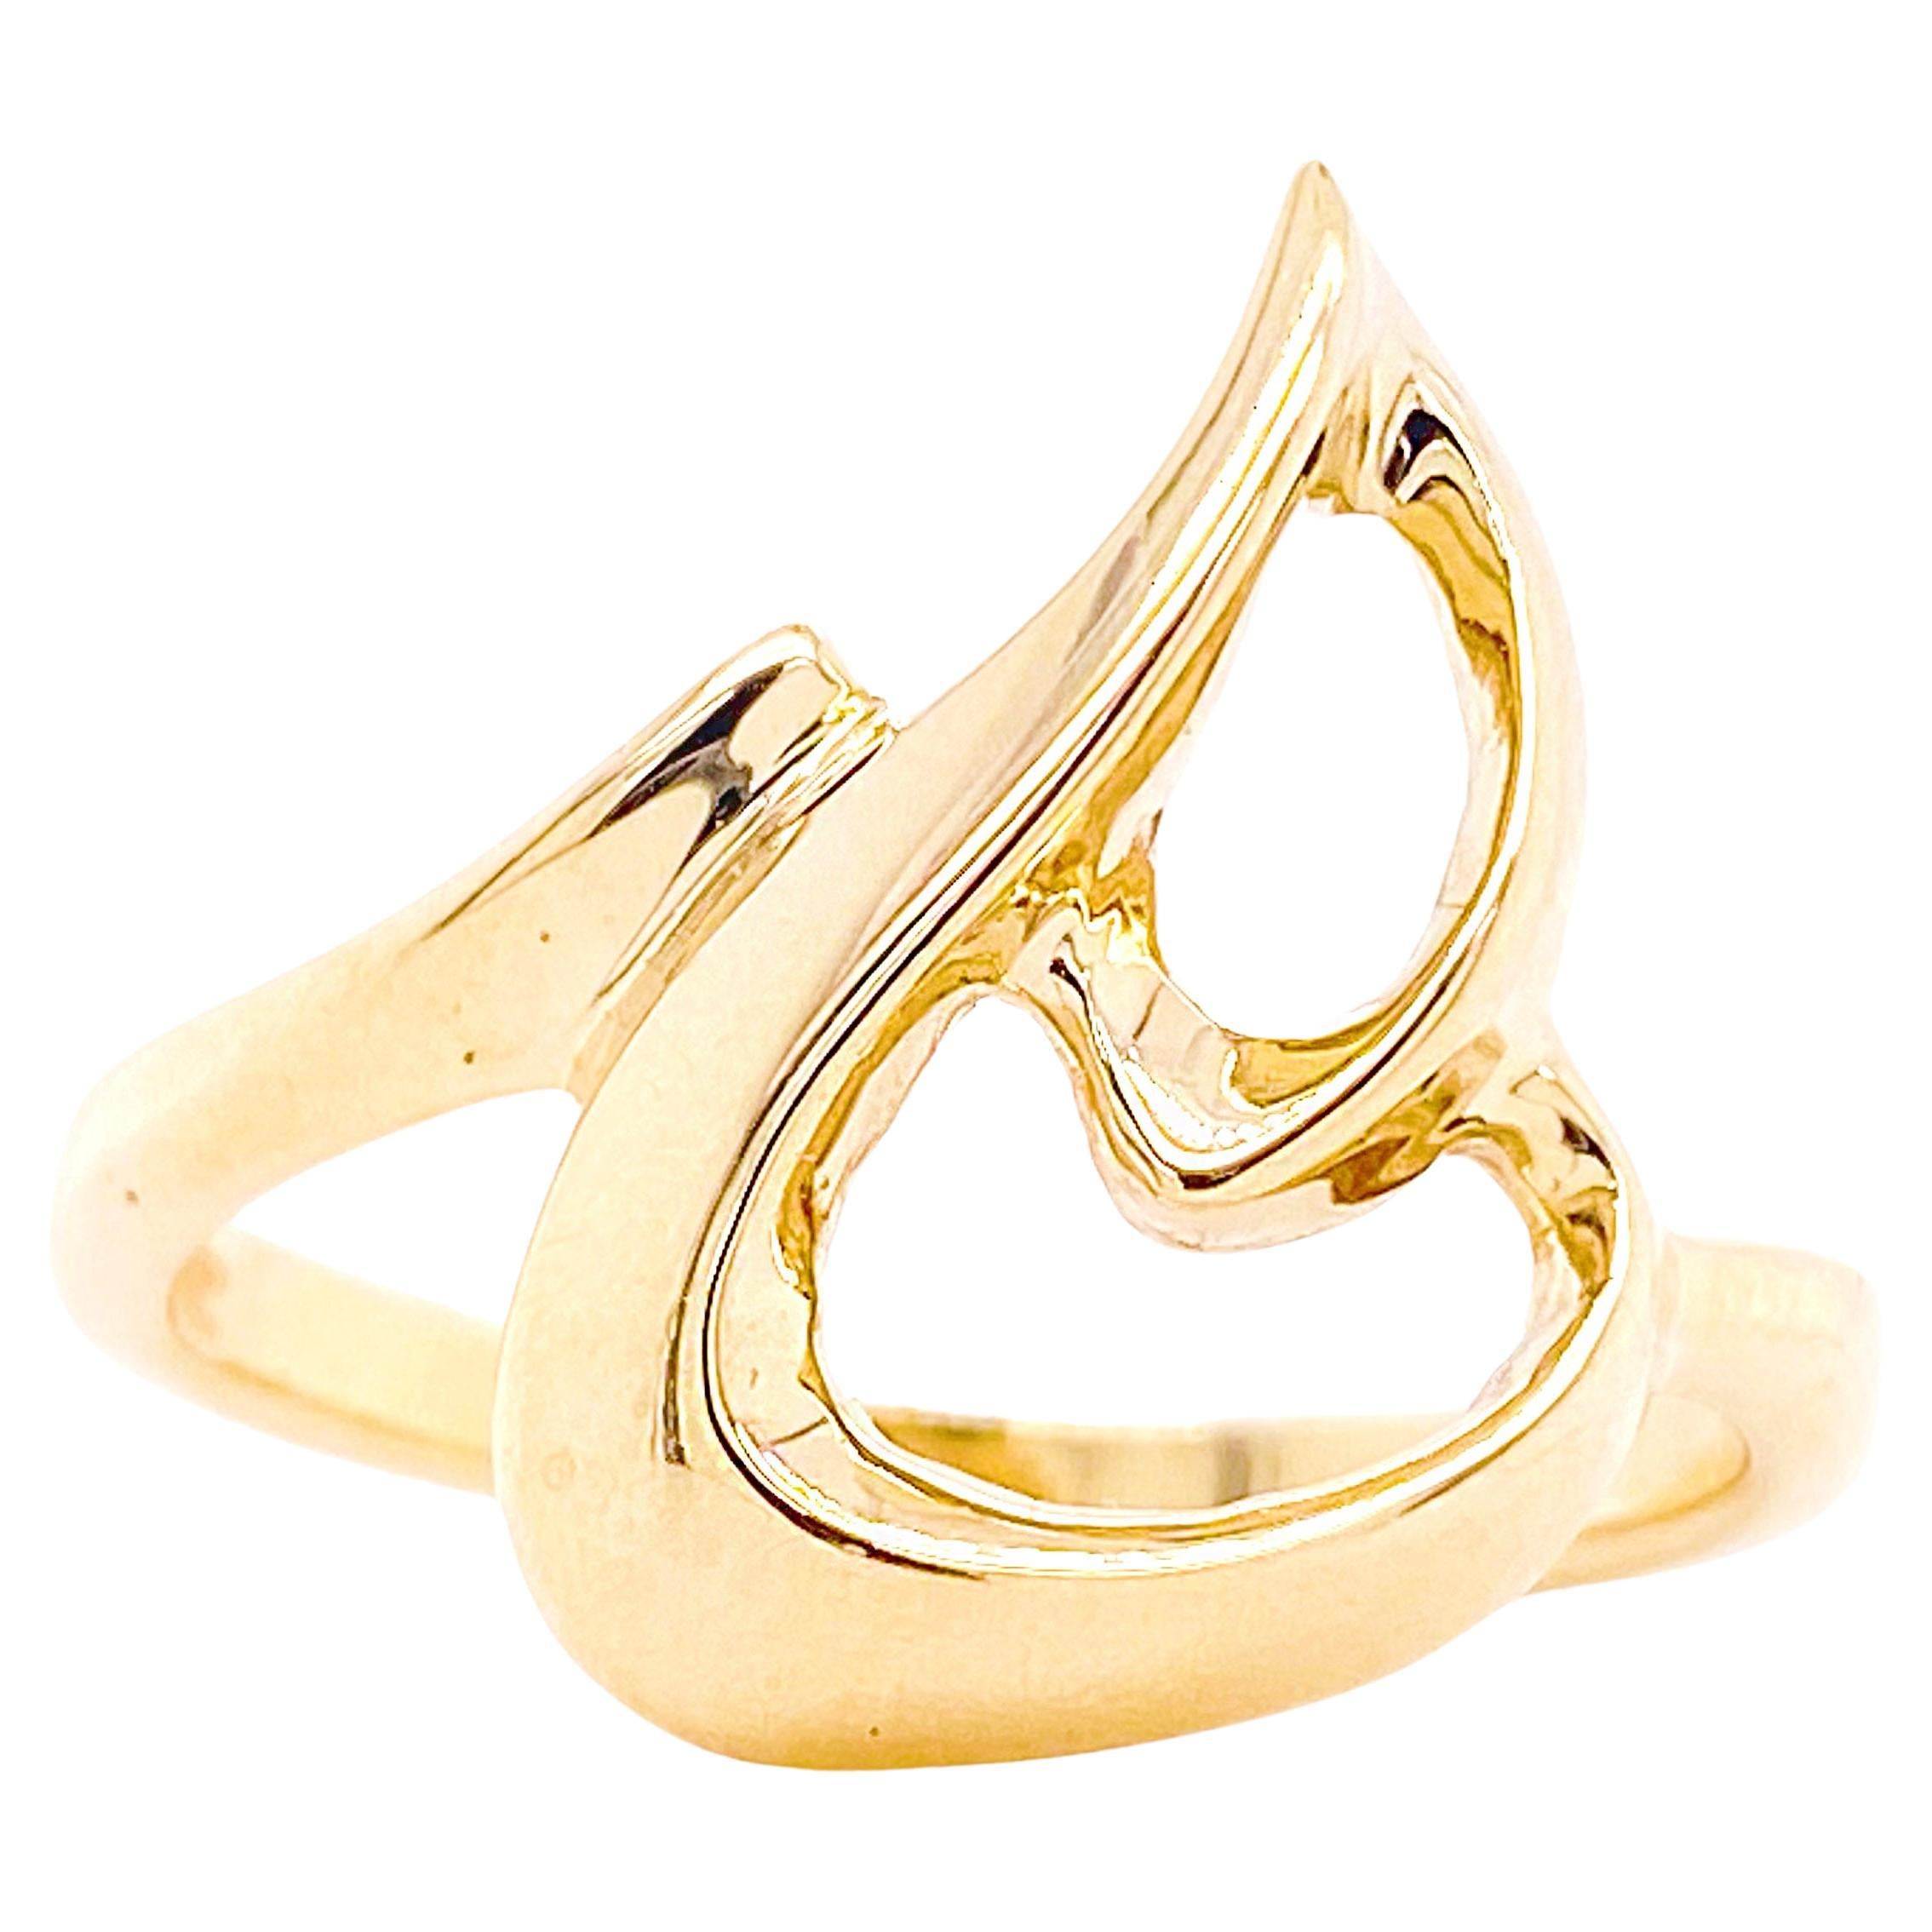 Original Freeform Ring by Five Star Jewelry in 14K Free Form Design